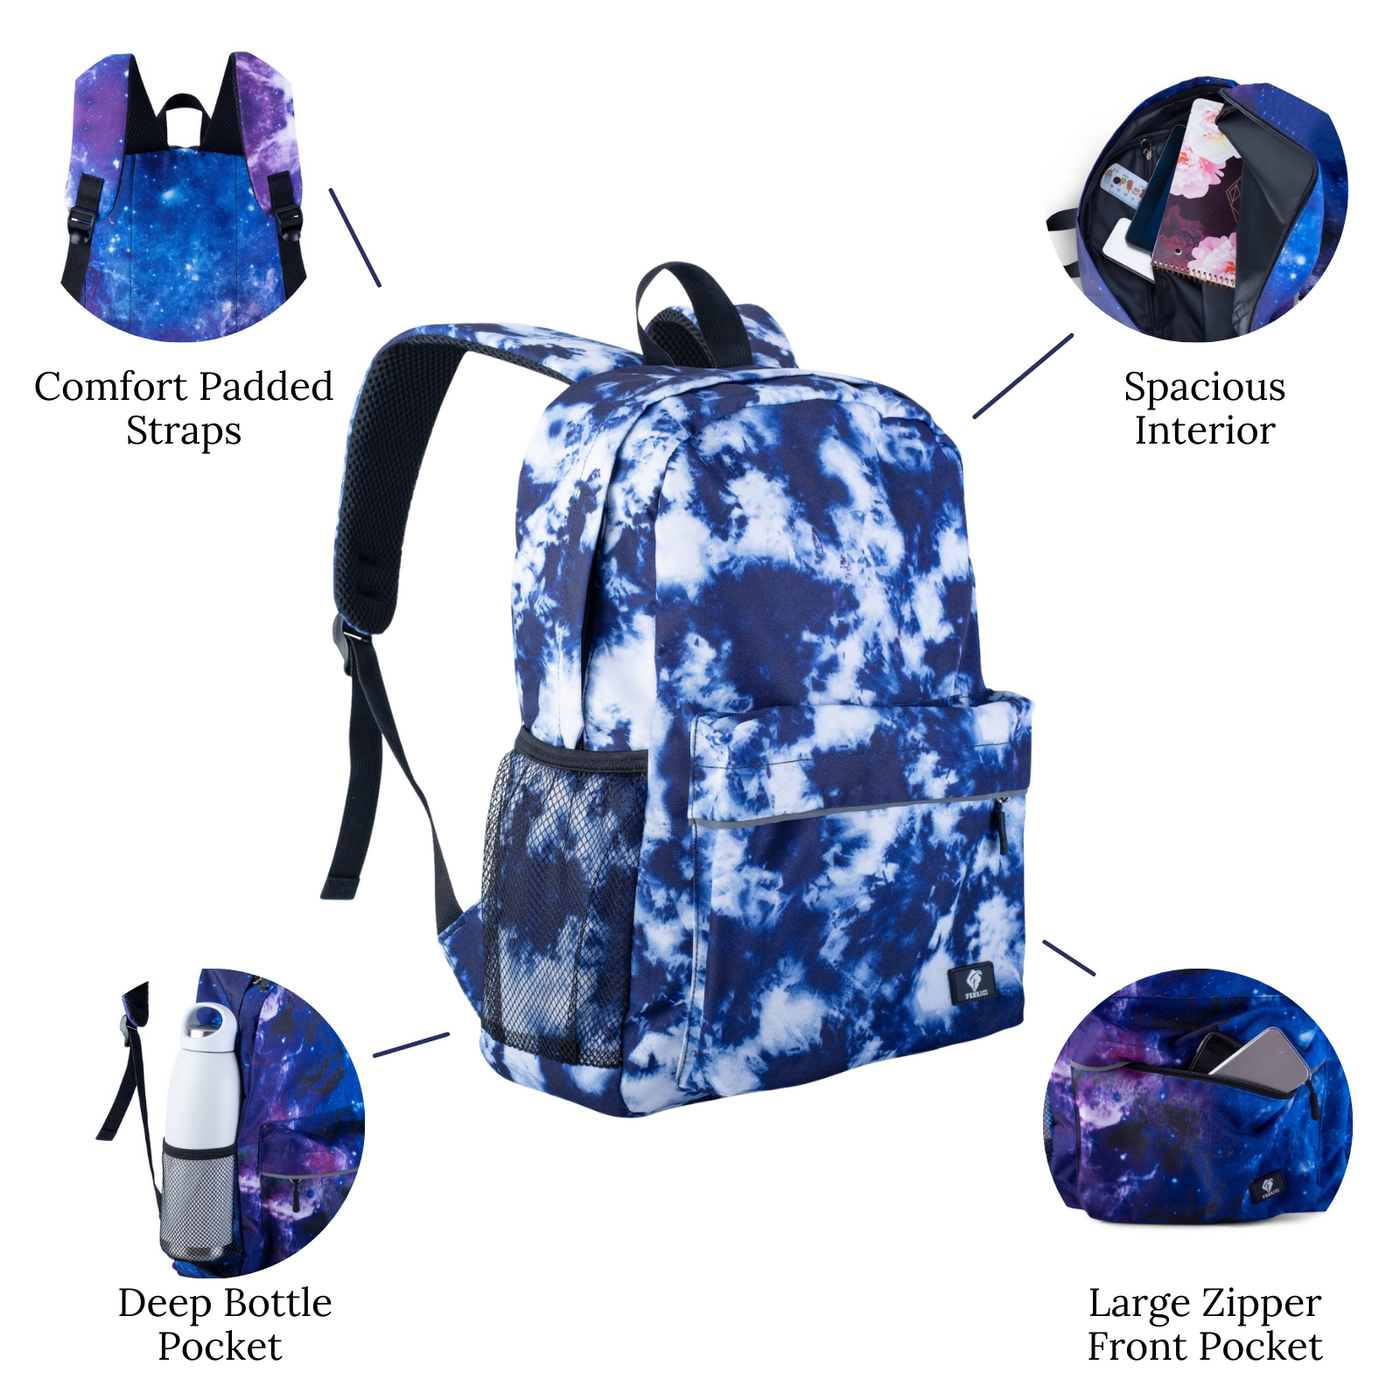 Tie Dye Lunch Box, Blue - Soft-Sided, Insulated, Gives Back to a Great –  Fenrici Brands